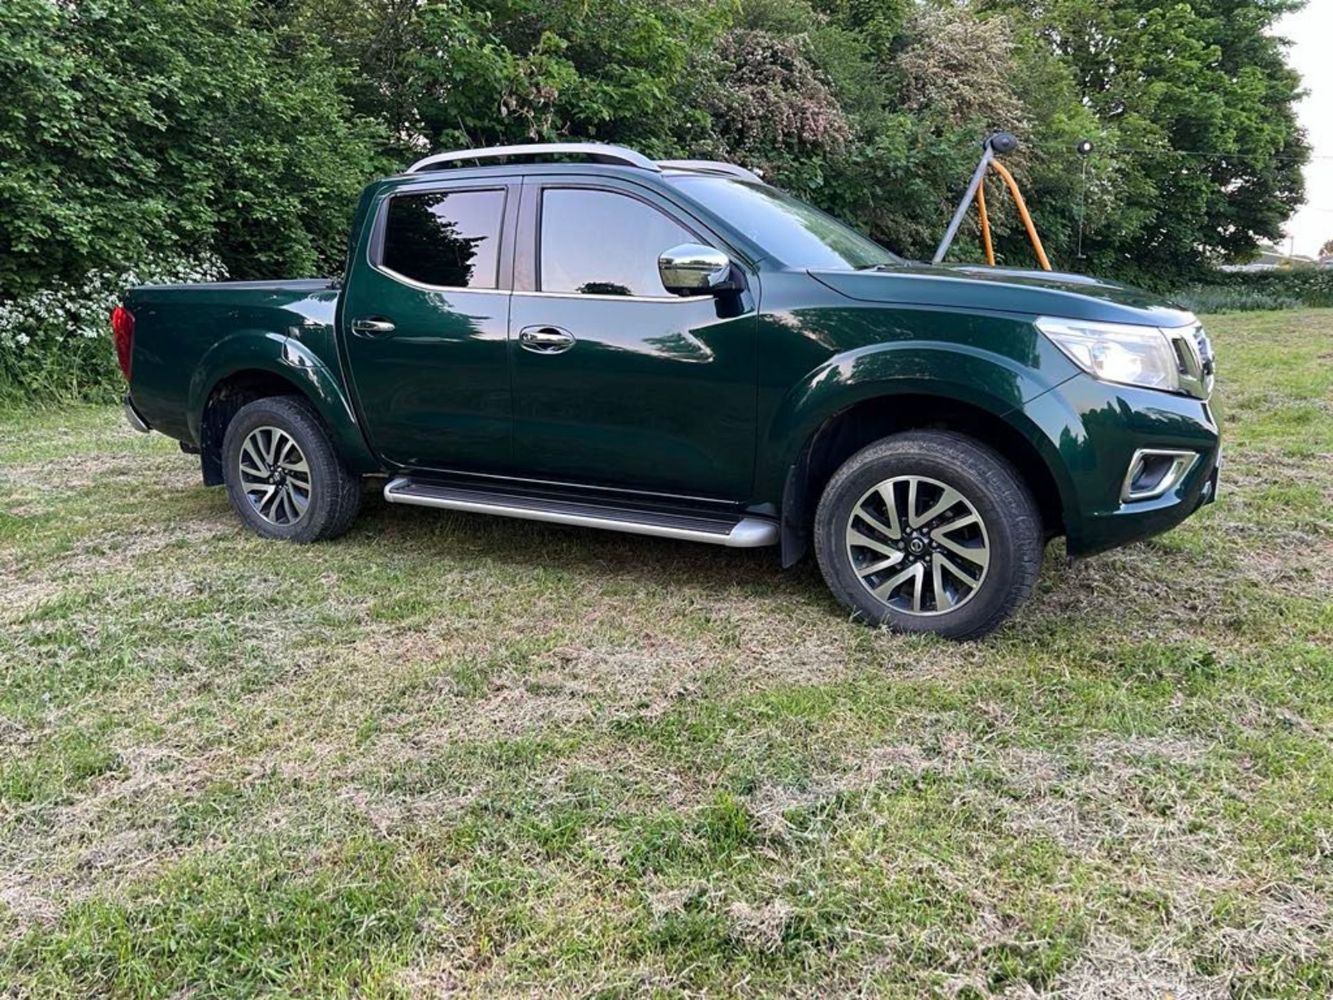 THURSDAY 11AM! 2019 NISSAN NAVARA TEKNA 190 4WD, MANITOU, TEREX, BOMAG, PLYMOUTH PROWLER, EV VEHICLES, TRACTORS, MOWERS, VANS & MUCH MORE!